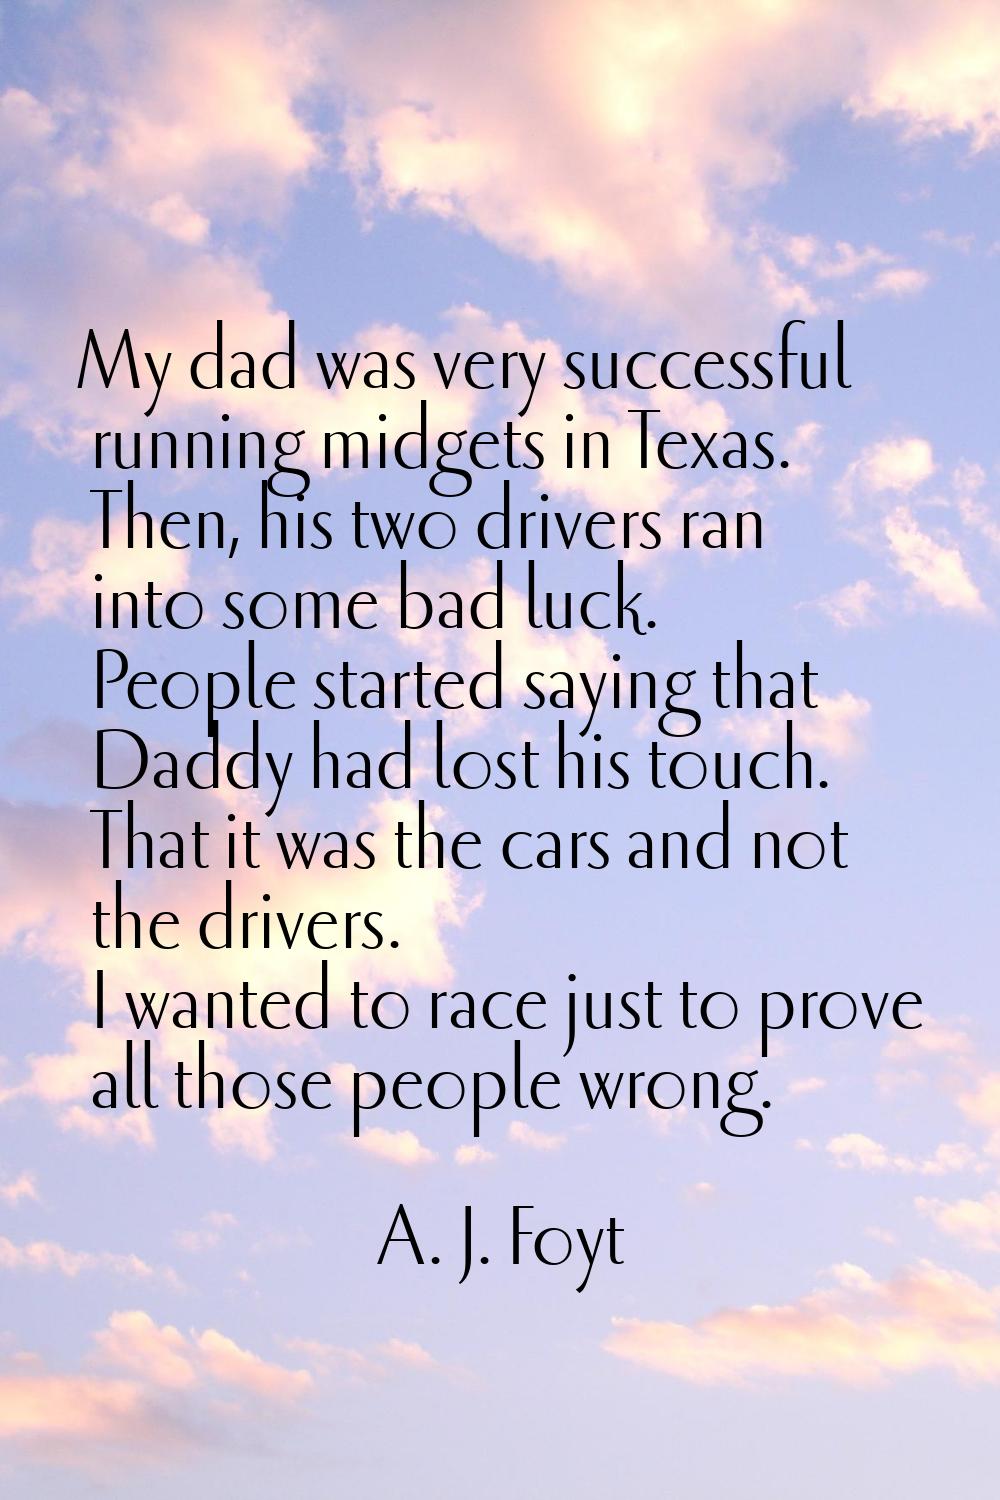 My dad was very successful running midgets in Texas. Then, his two drivers ran into some bad luck. 